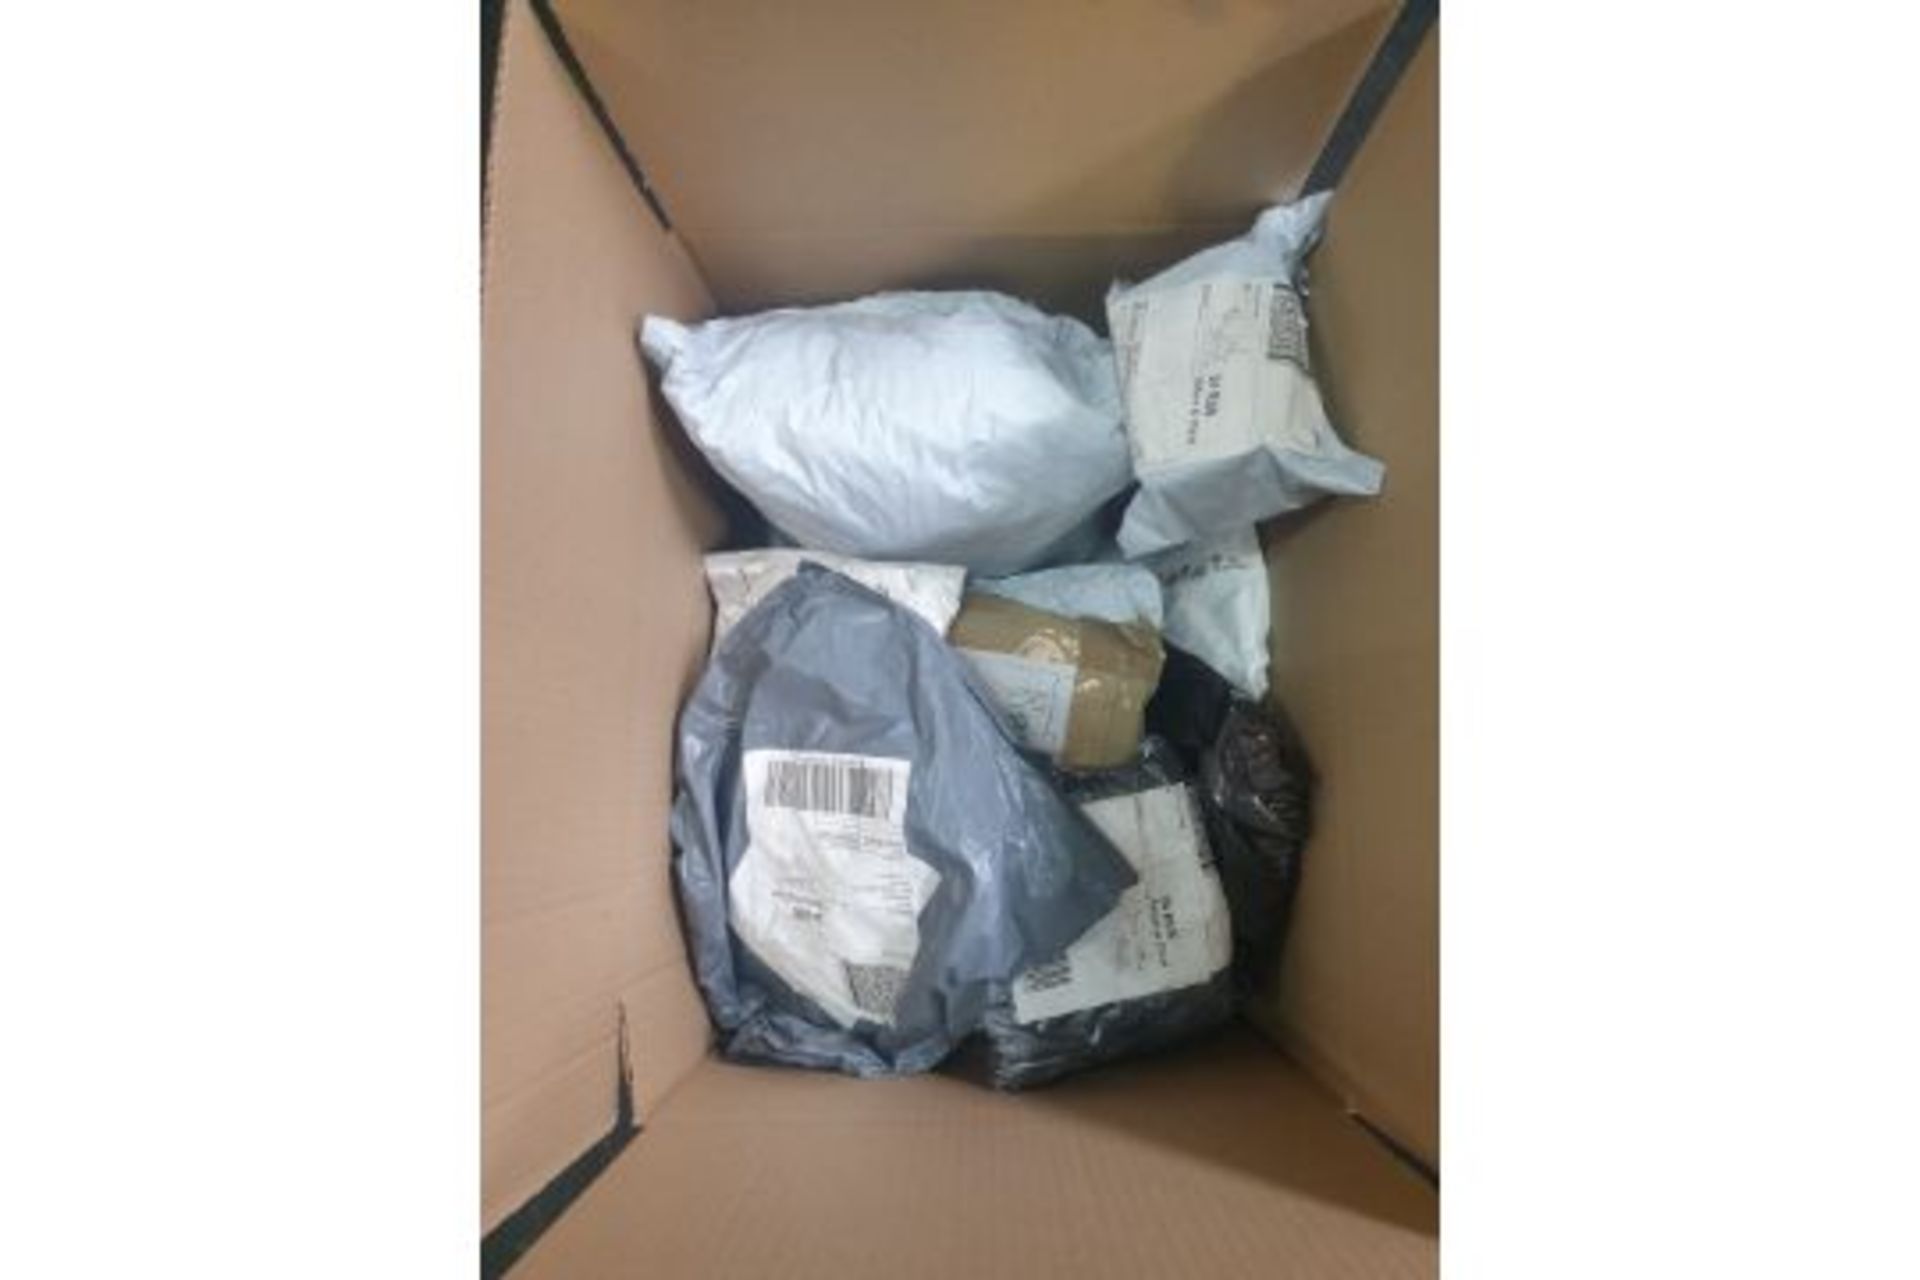 TRADE LOT TO CONTAIN 100 x UNCHECKED COURIER/INTERNET RETURNS. CONDITION & ITEMS UNKNOWN. ITEMS WILL - Bild 3 aus 8